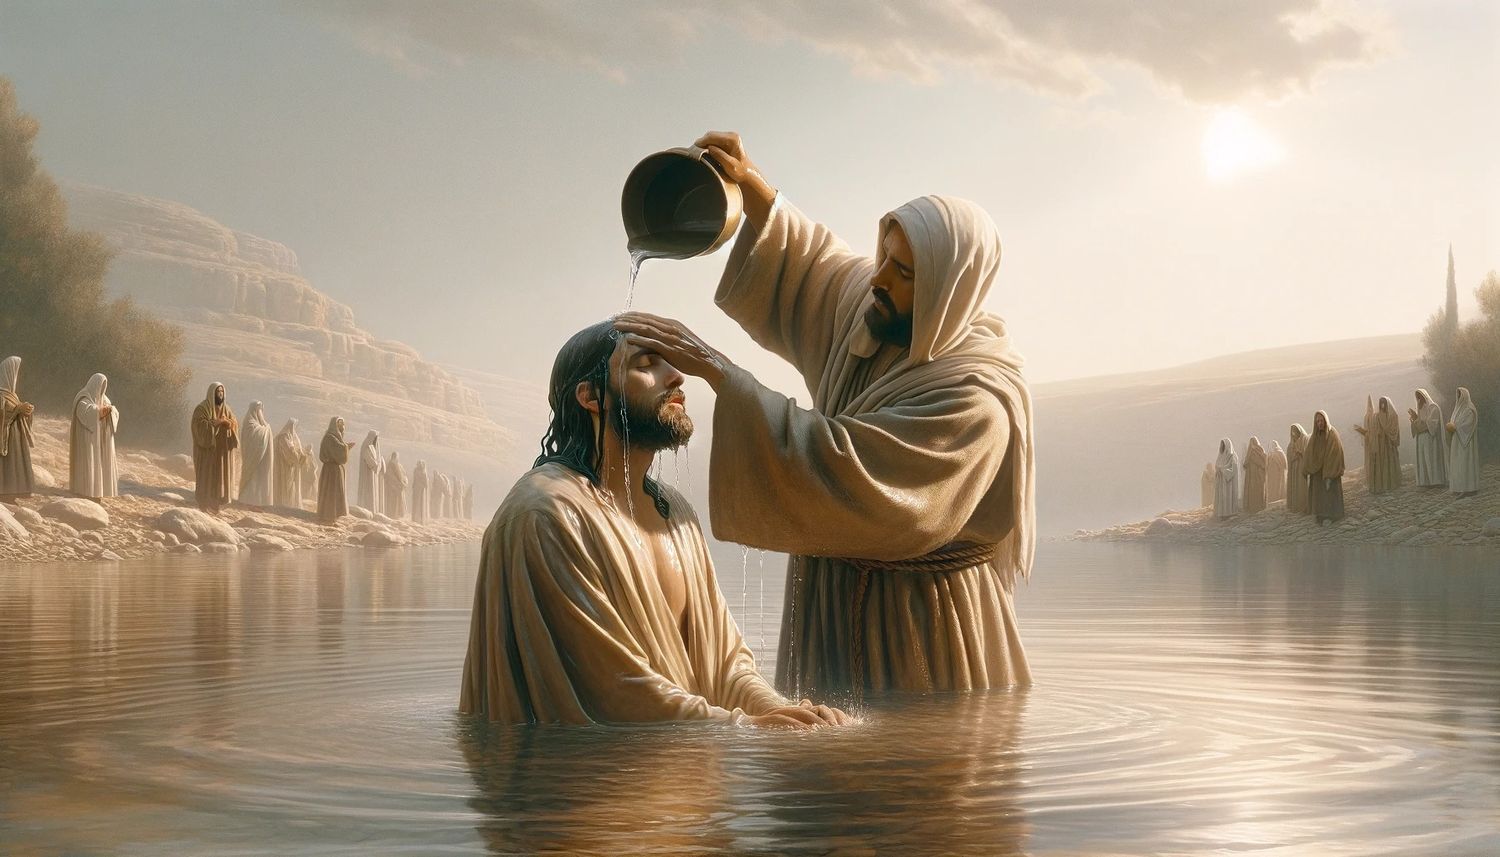 What Can We Learn From John The Baptist